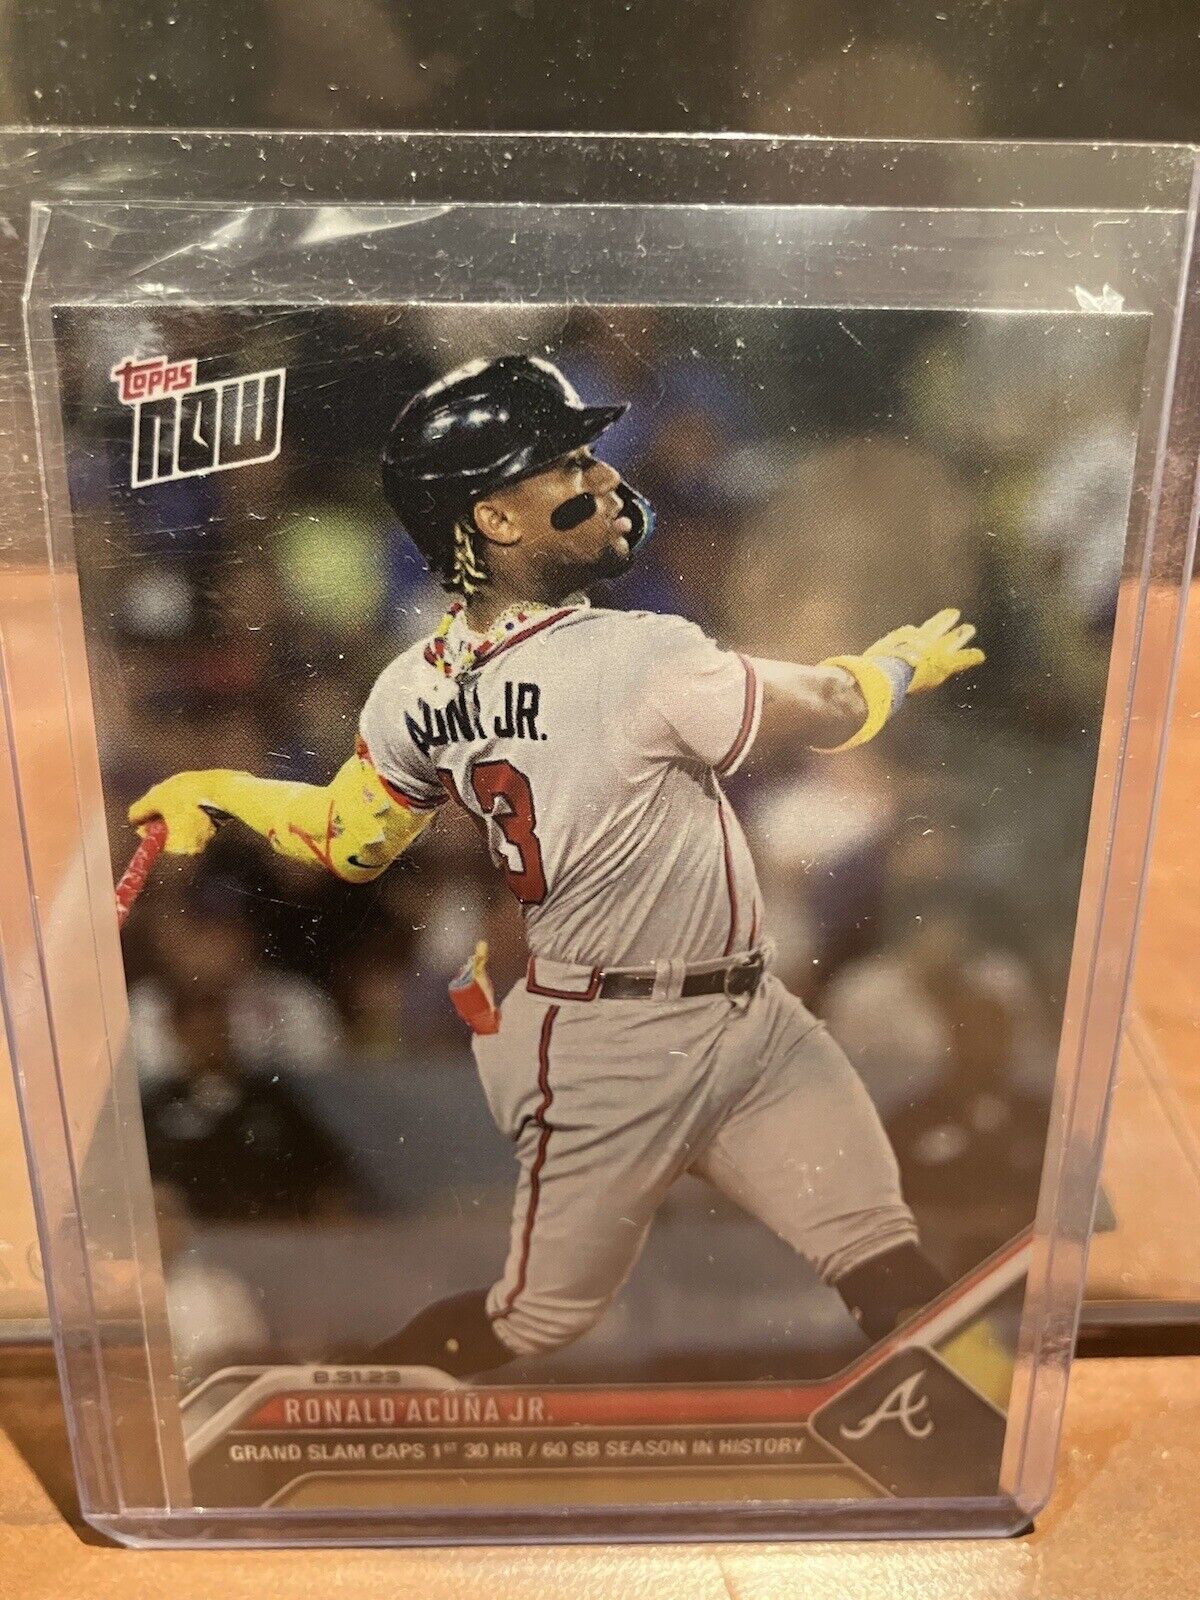 2023 Topps Now #791 Ronald Acuna Jr. 1st 30/60 Season in MLB History